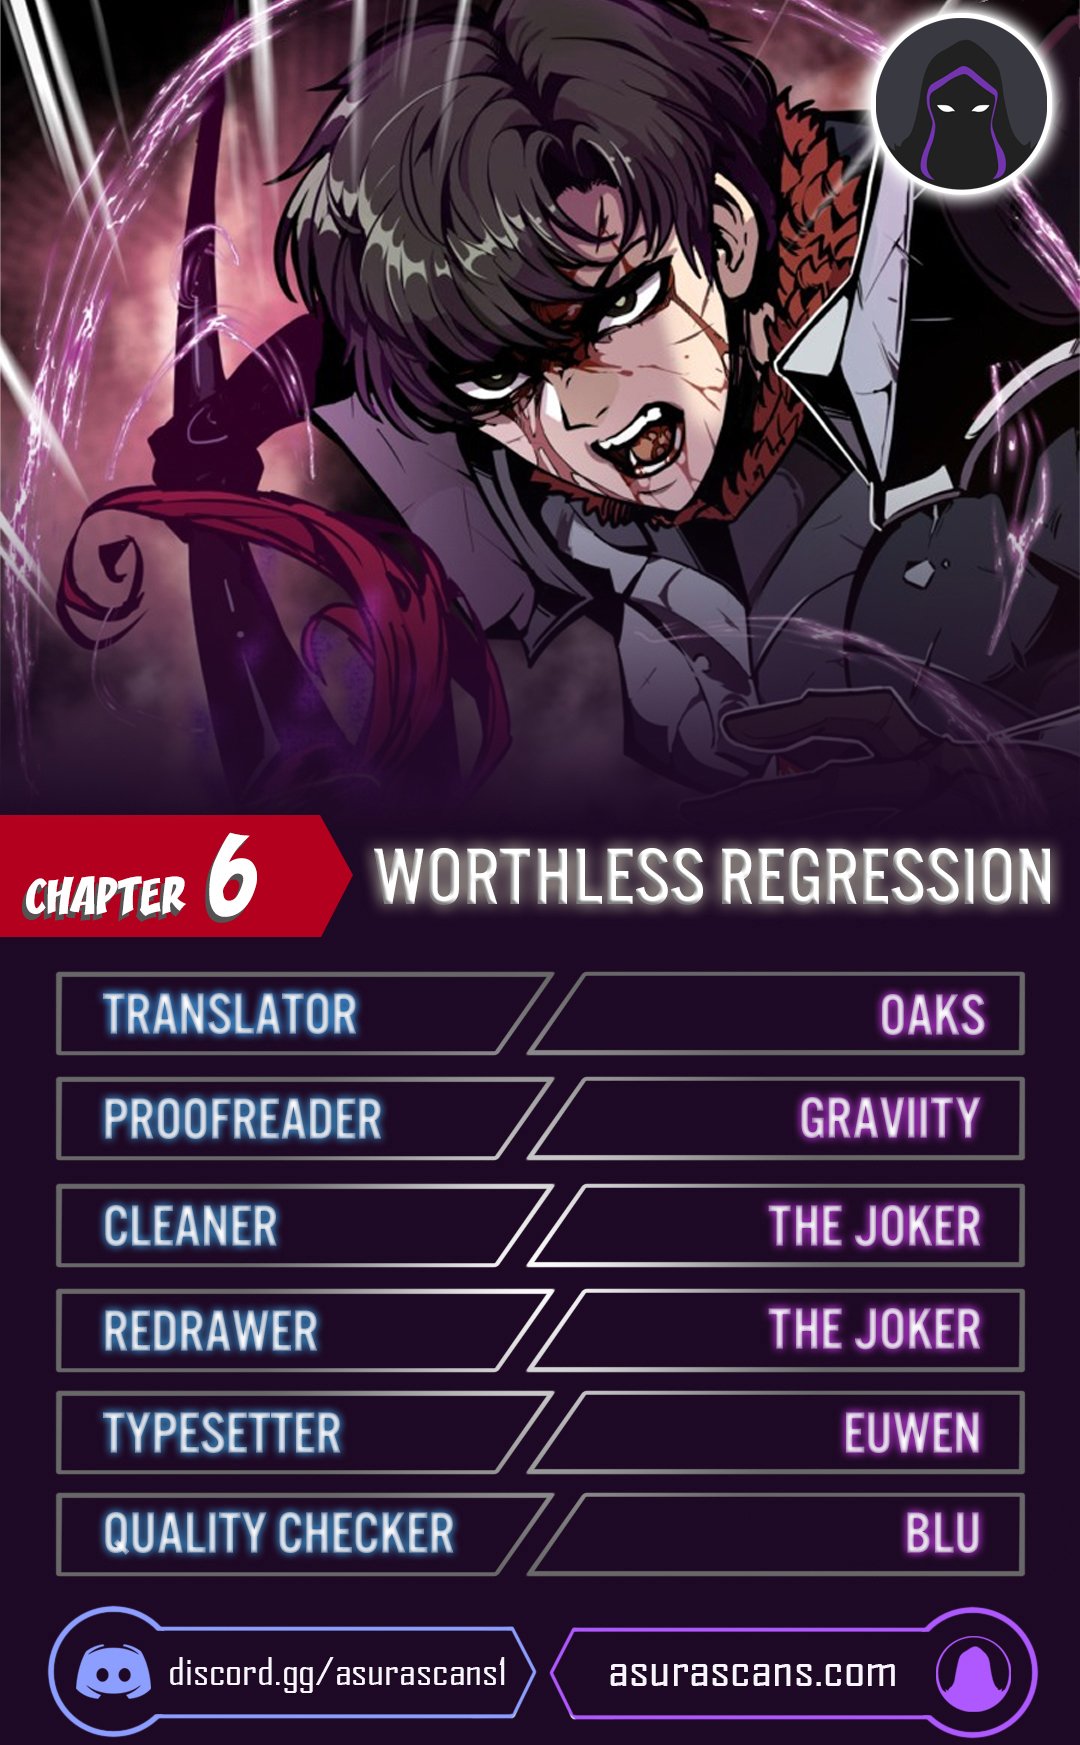 Worthless Regression - Chapter 20444 - Image 1